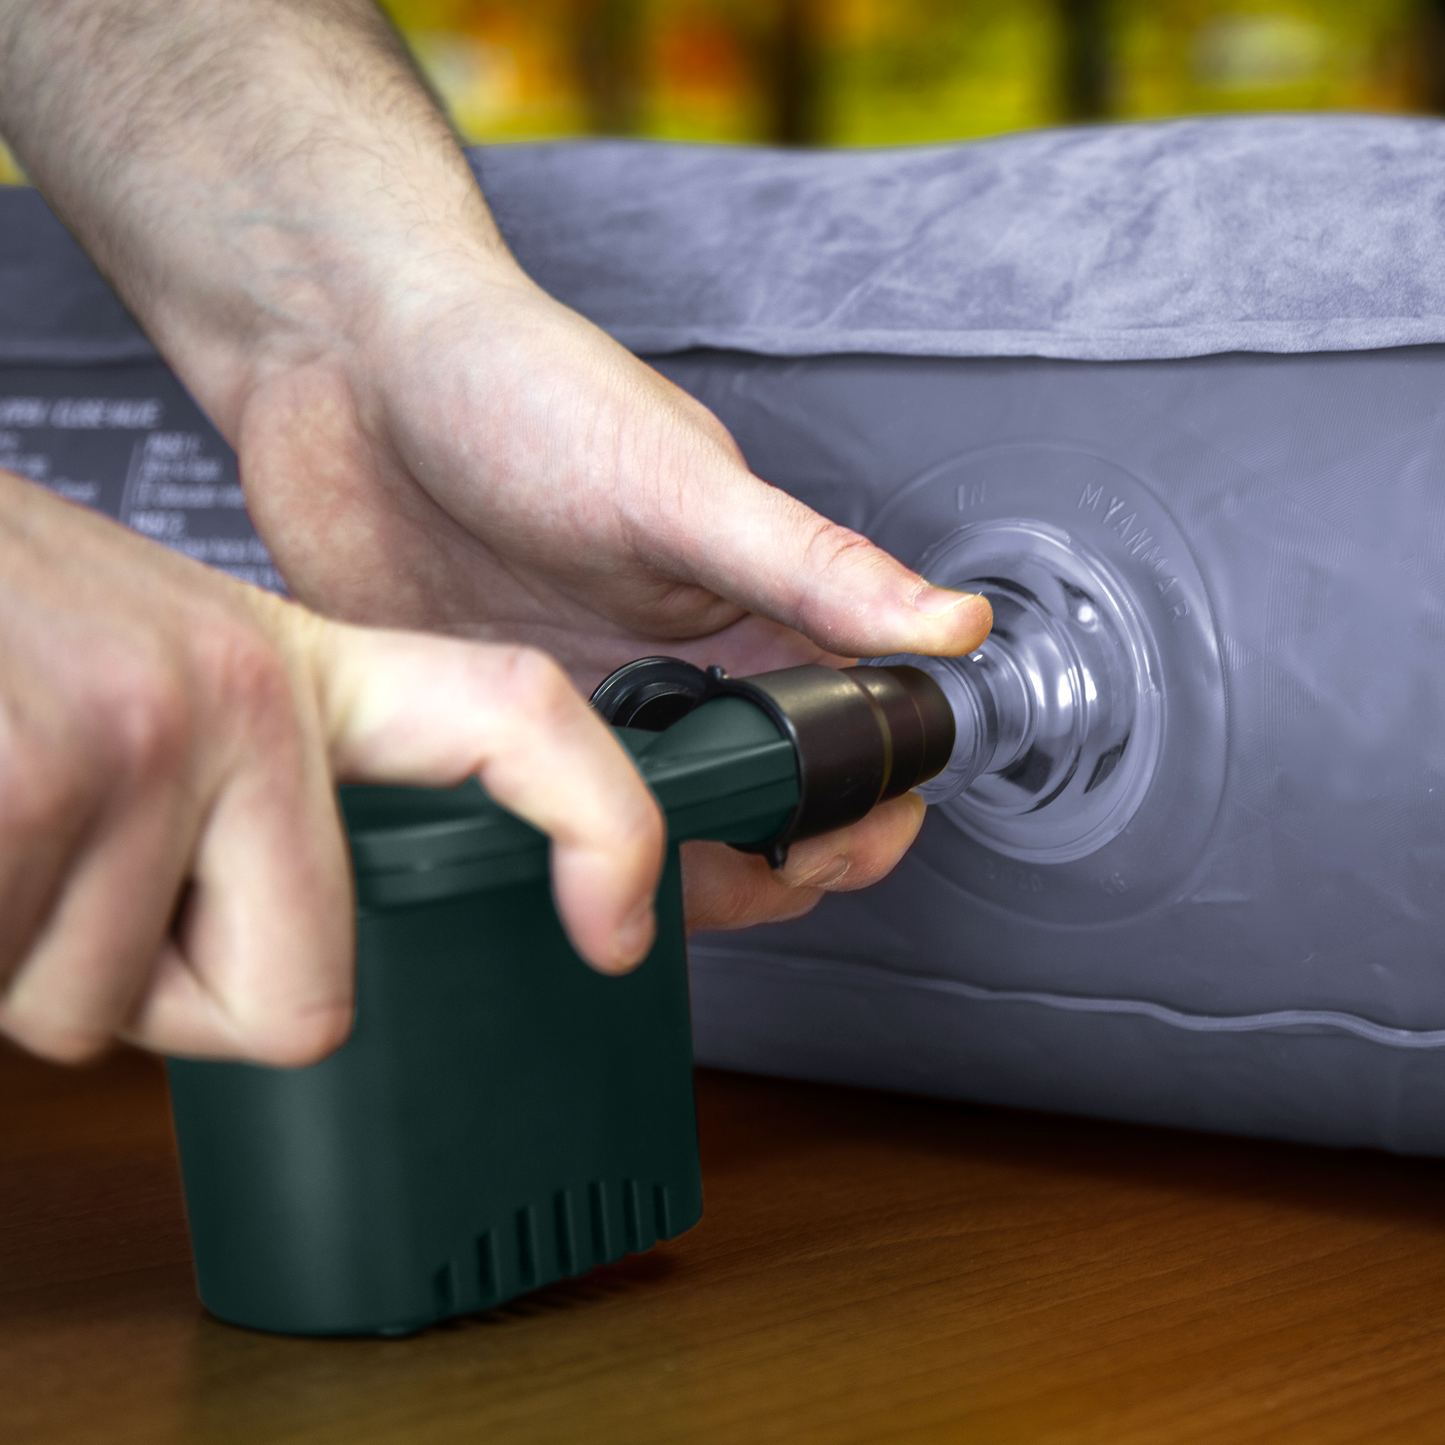 Rechargeable Air Pump